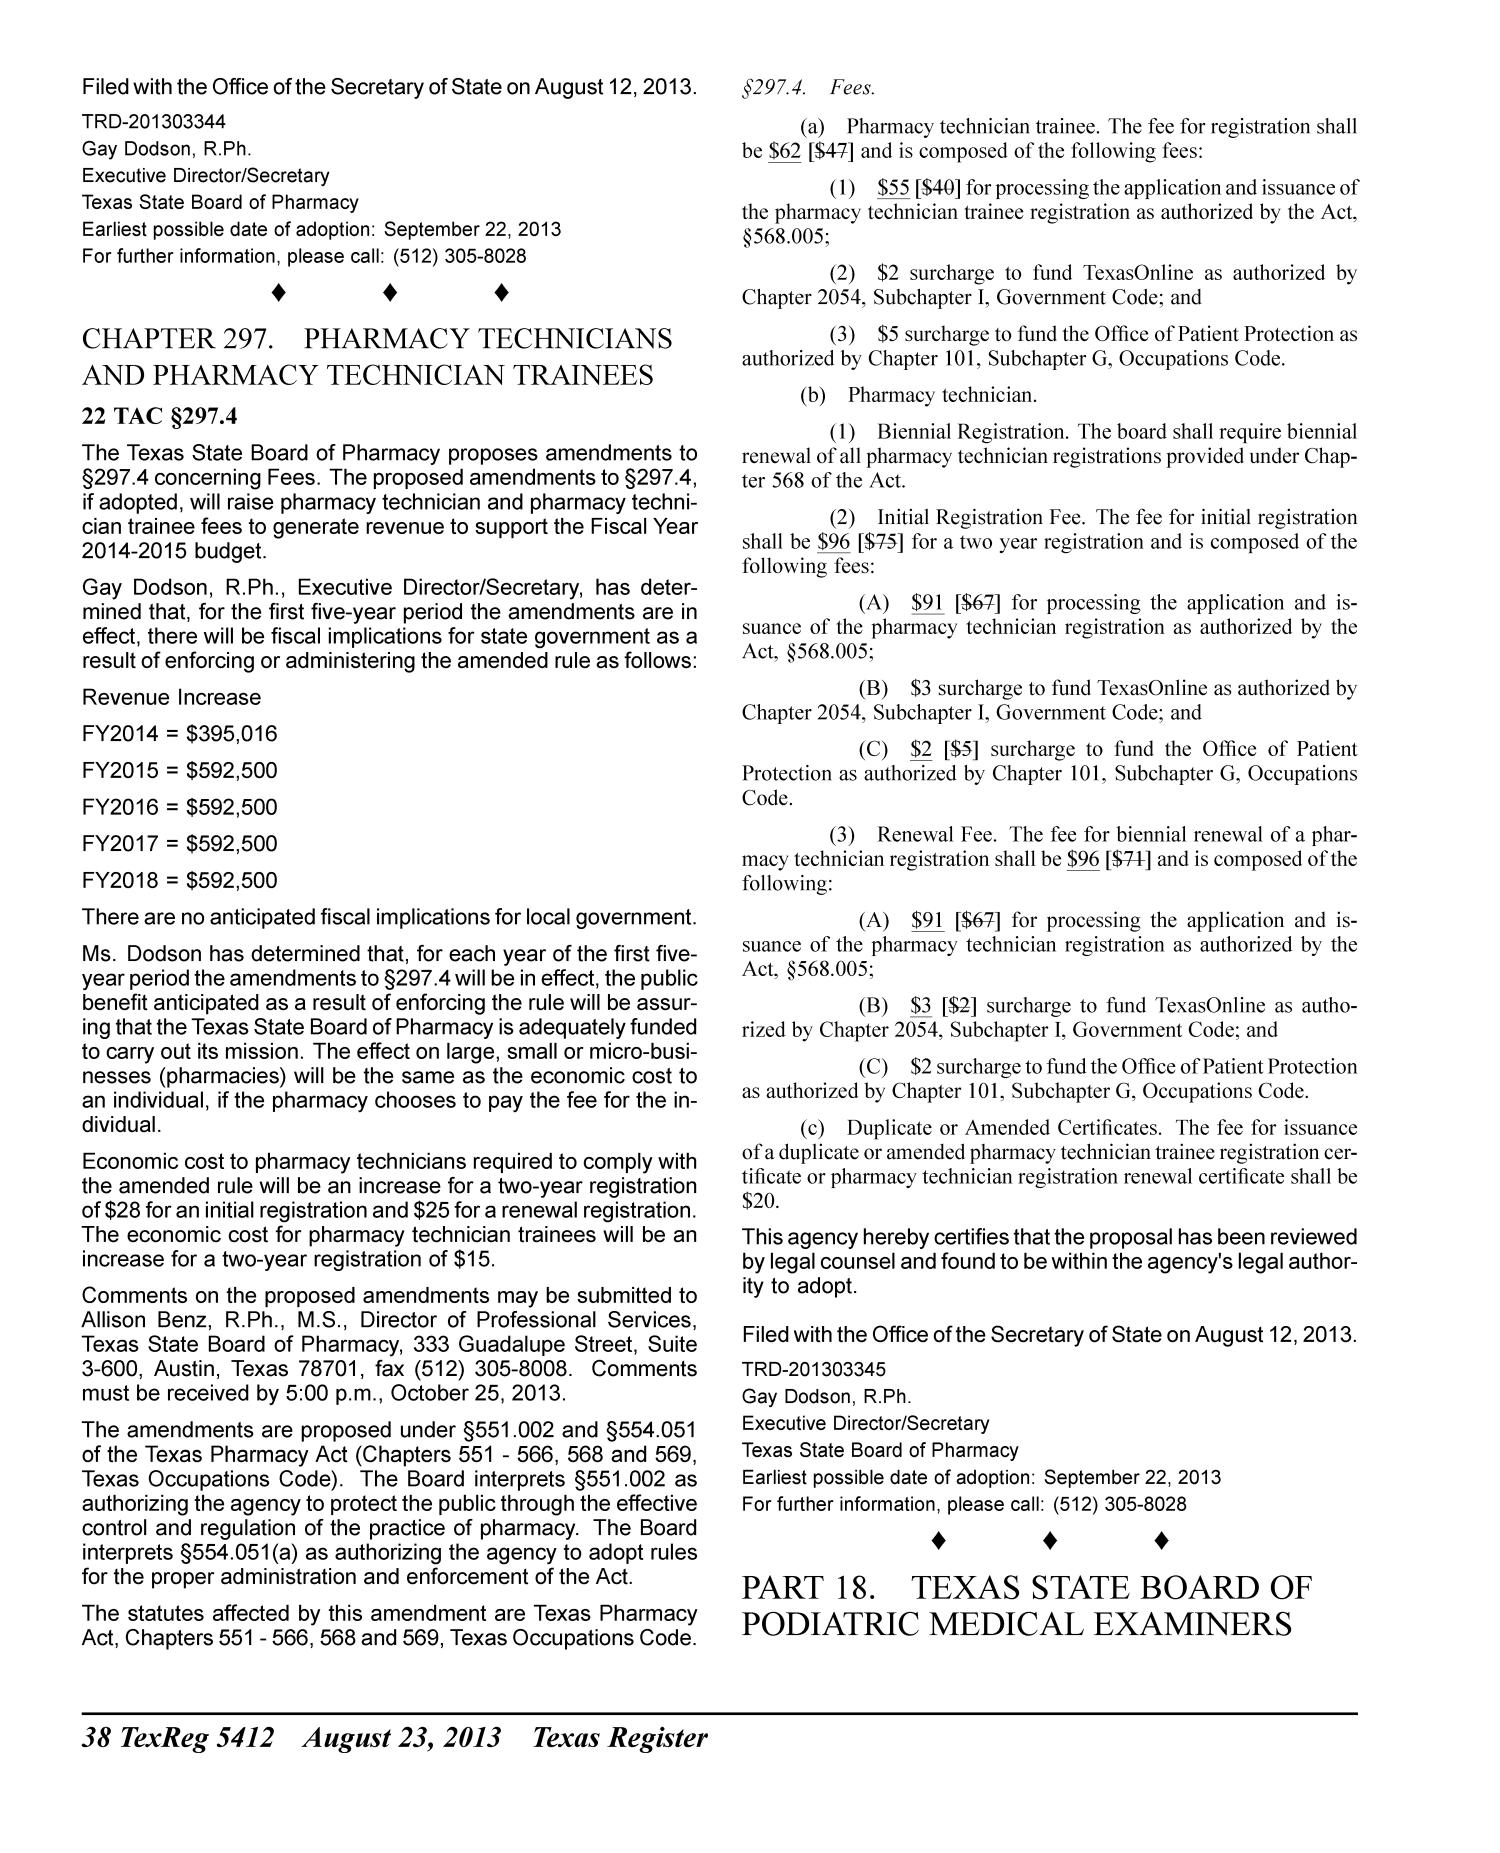 Texas Register, Volume 38, Number 34, Pages 5371-5484, August 23, 2013
                                                
                                                    5412
                                                